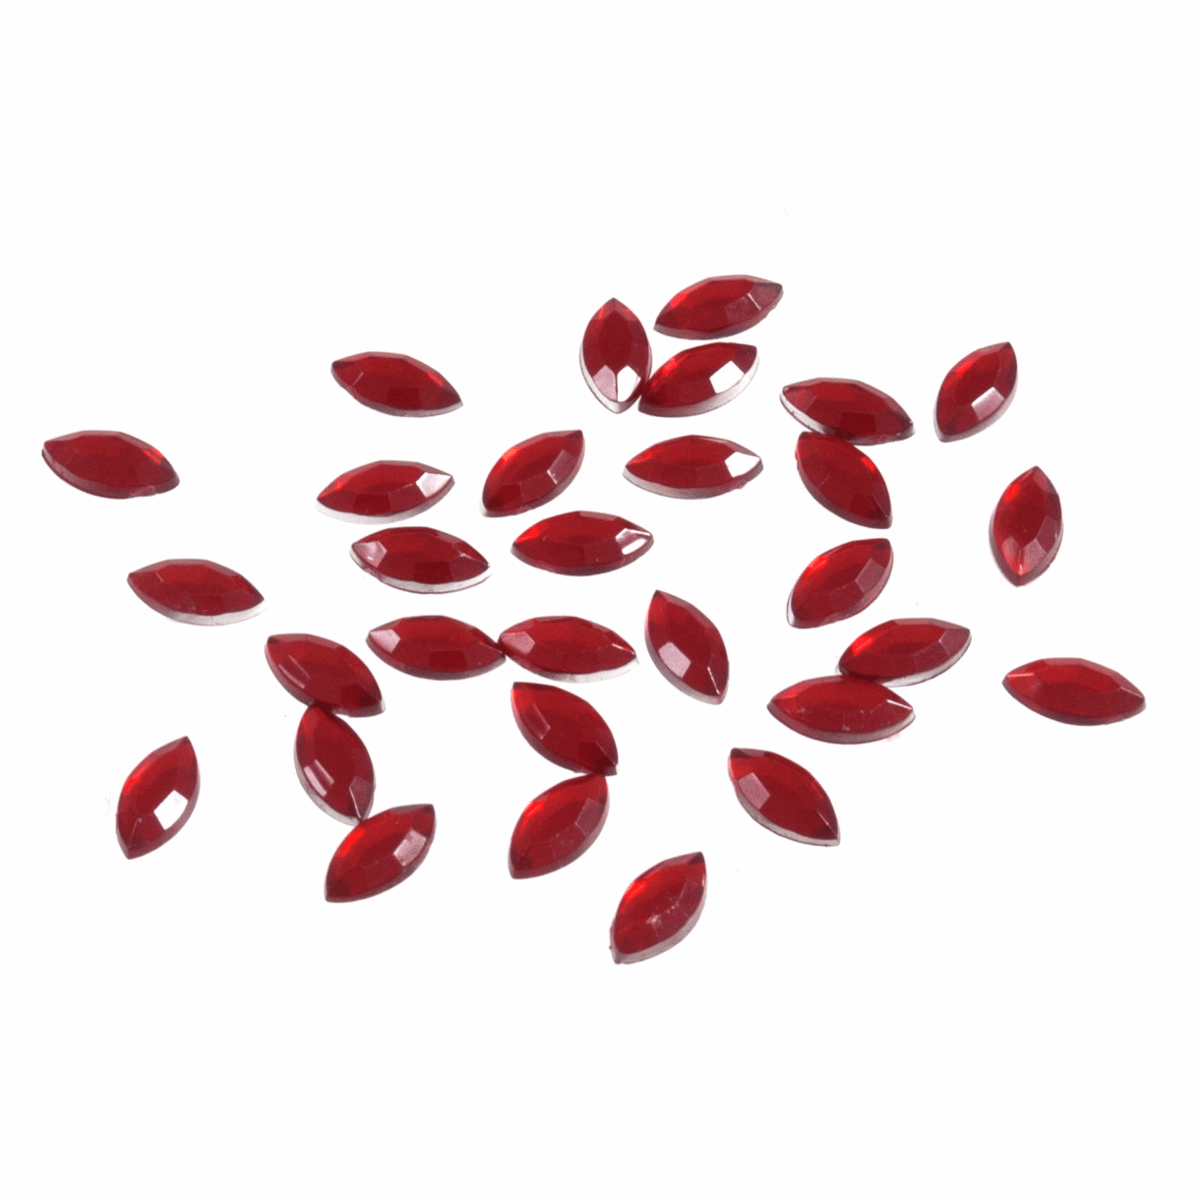 Trimits Red Glue-On Acrylic Stones - Oval 4mm x 8mm